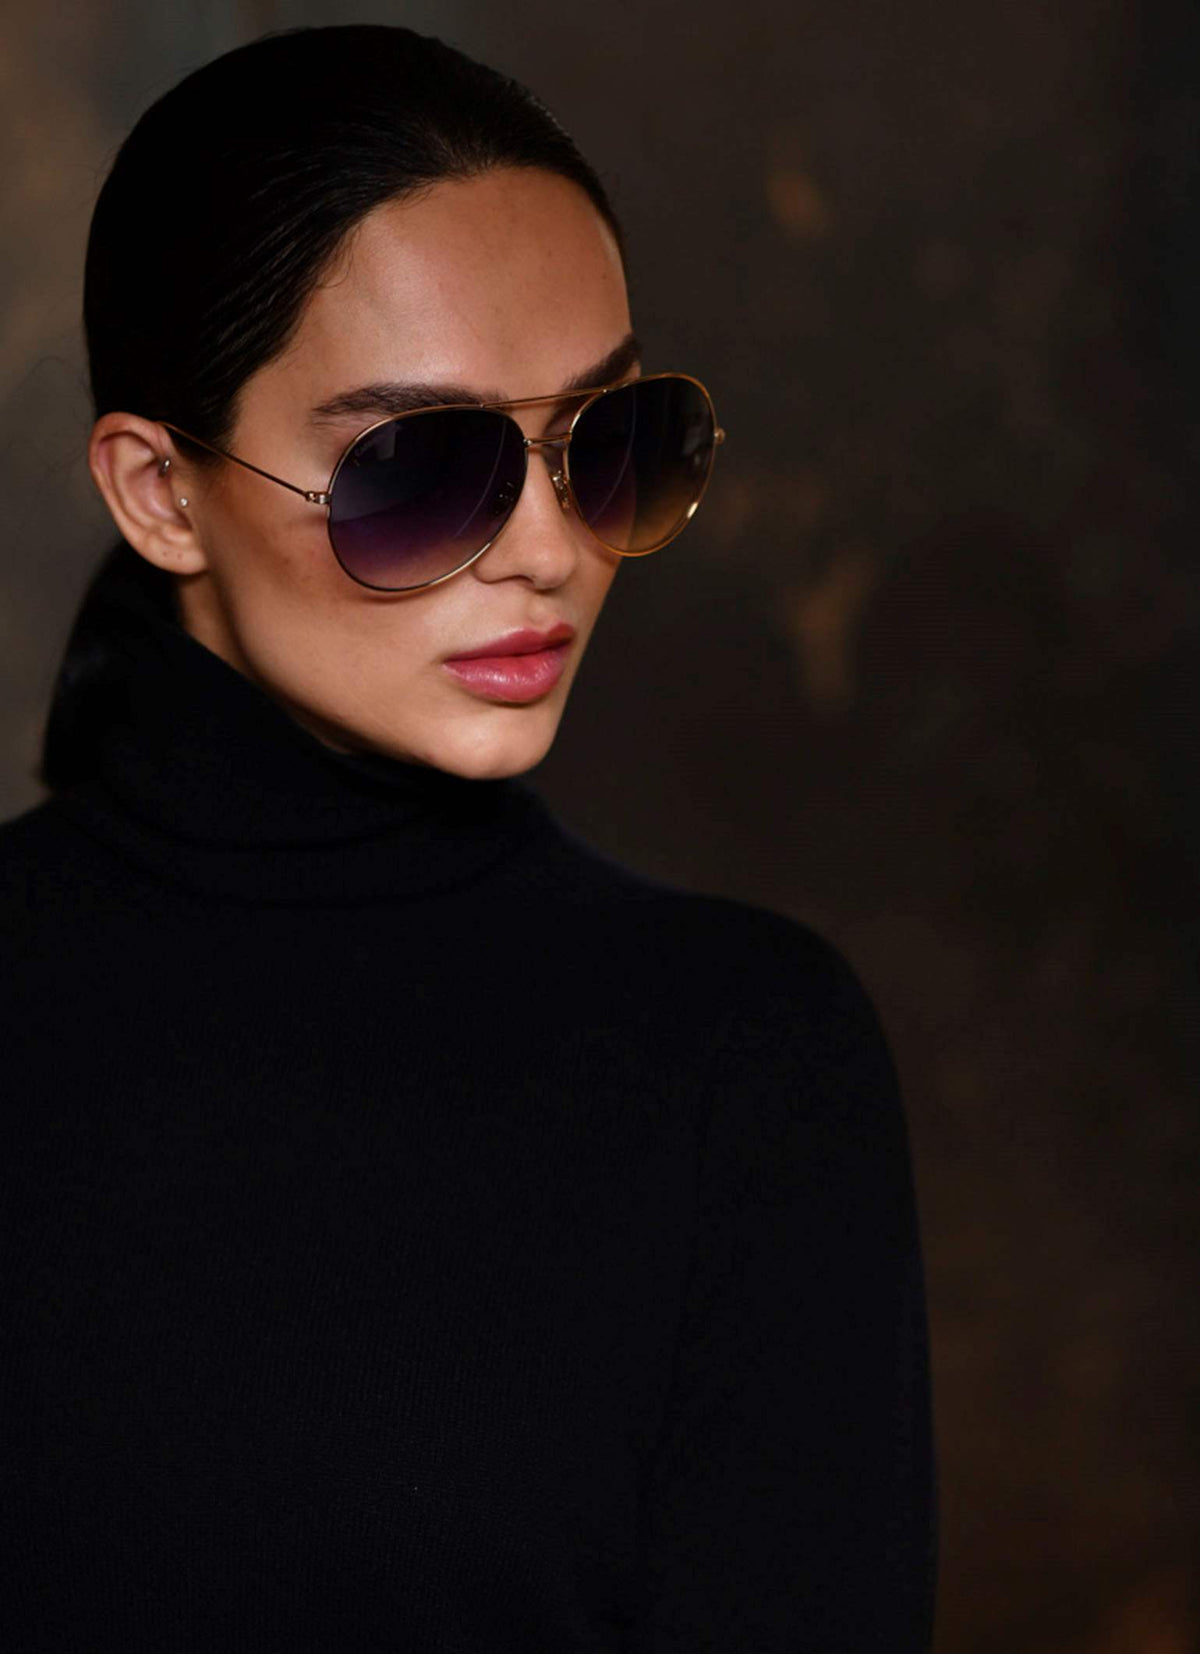 Women wearing made in Italy turtleneck cashmere cardigan in color black with matching Carmen Sol sunglasses